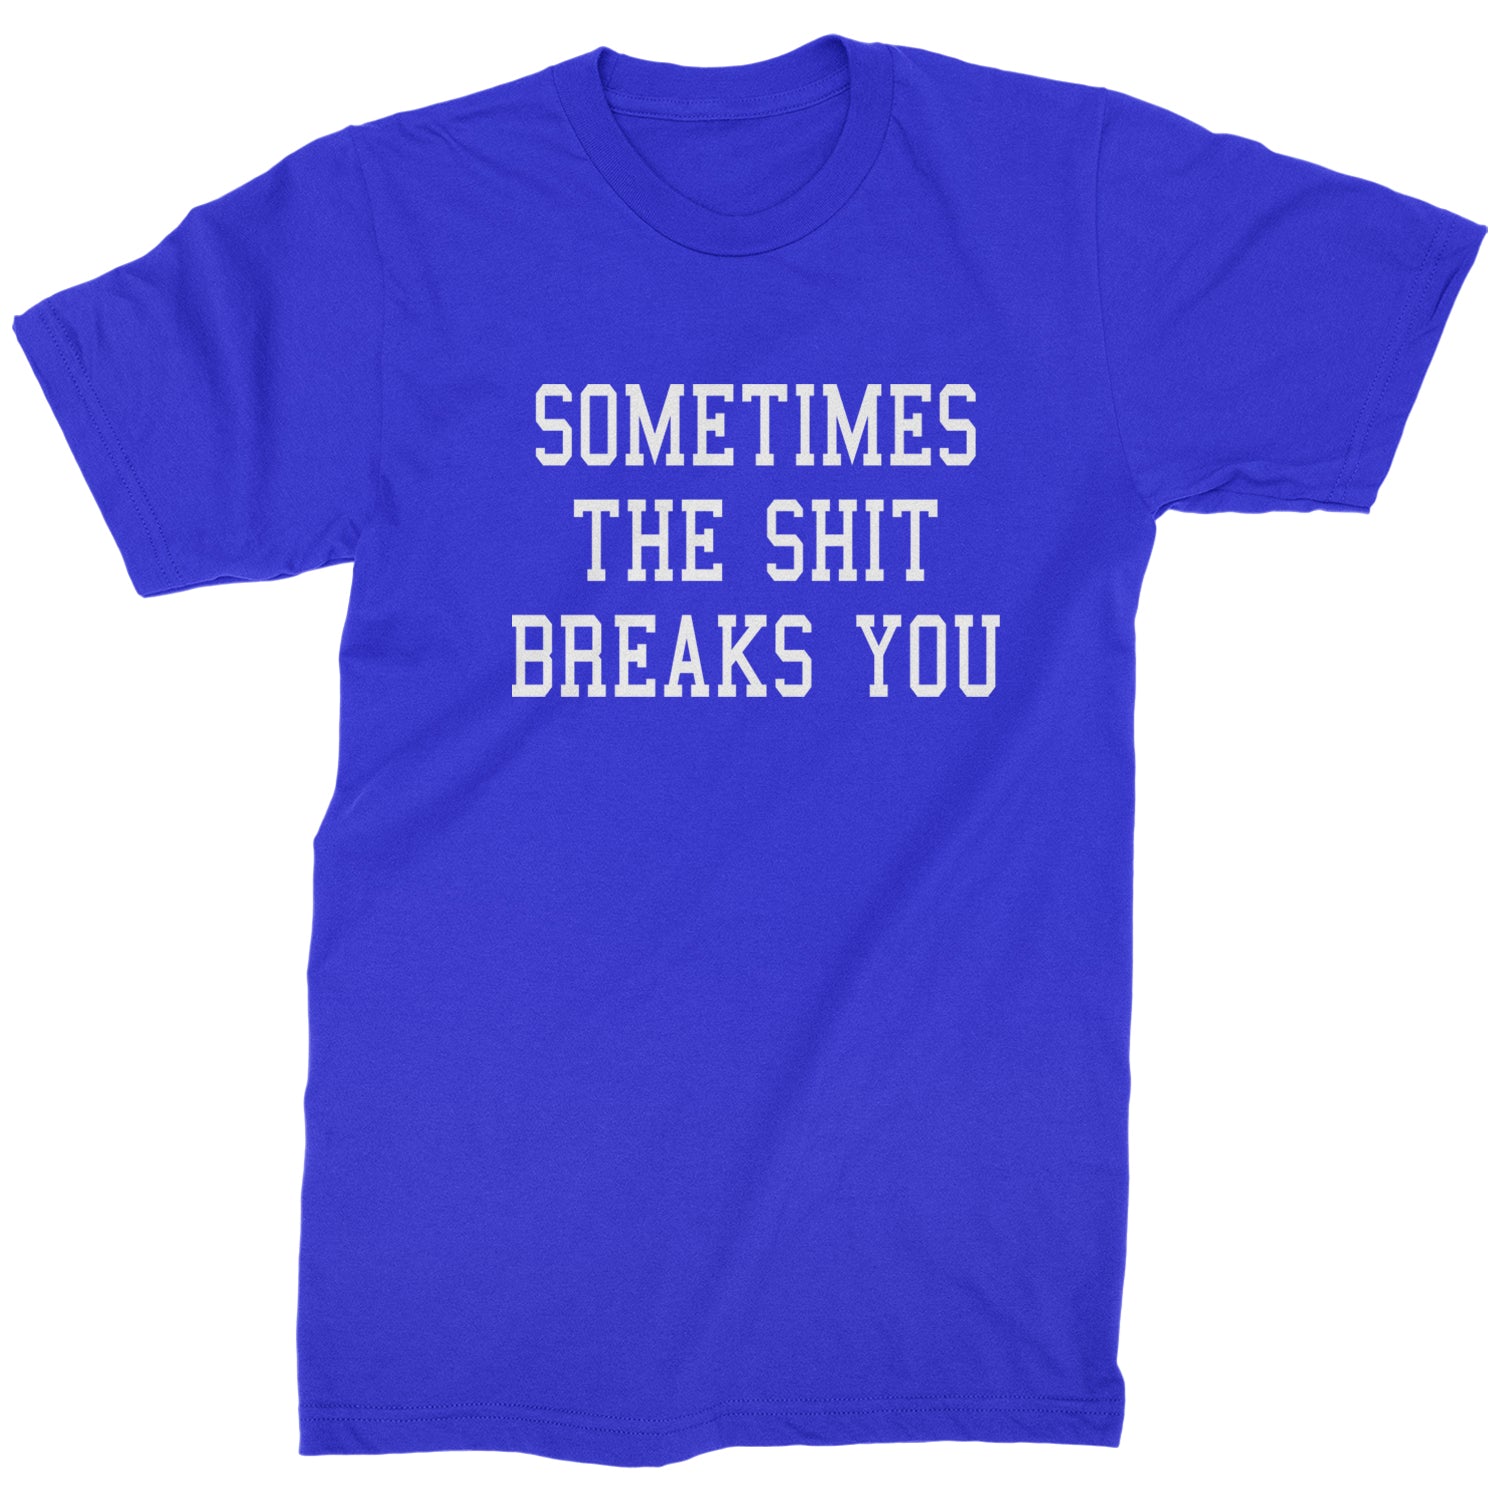 Sometimes The Sh-t Breaks You Mens T-shirt china, chinese, funny, in, man, meme, observed, shanghai, shirt by Expression Tees